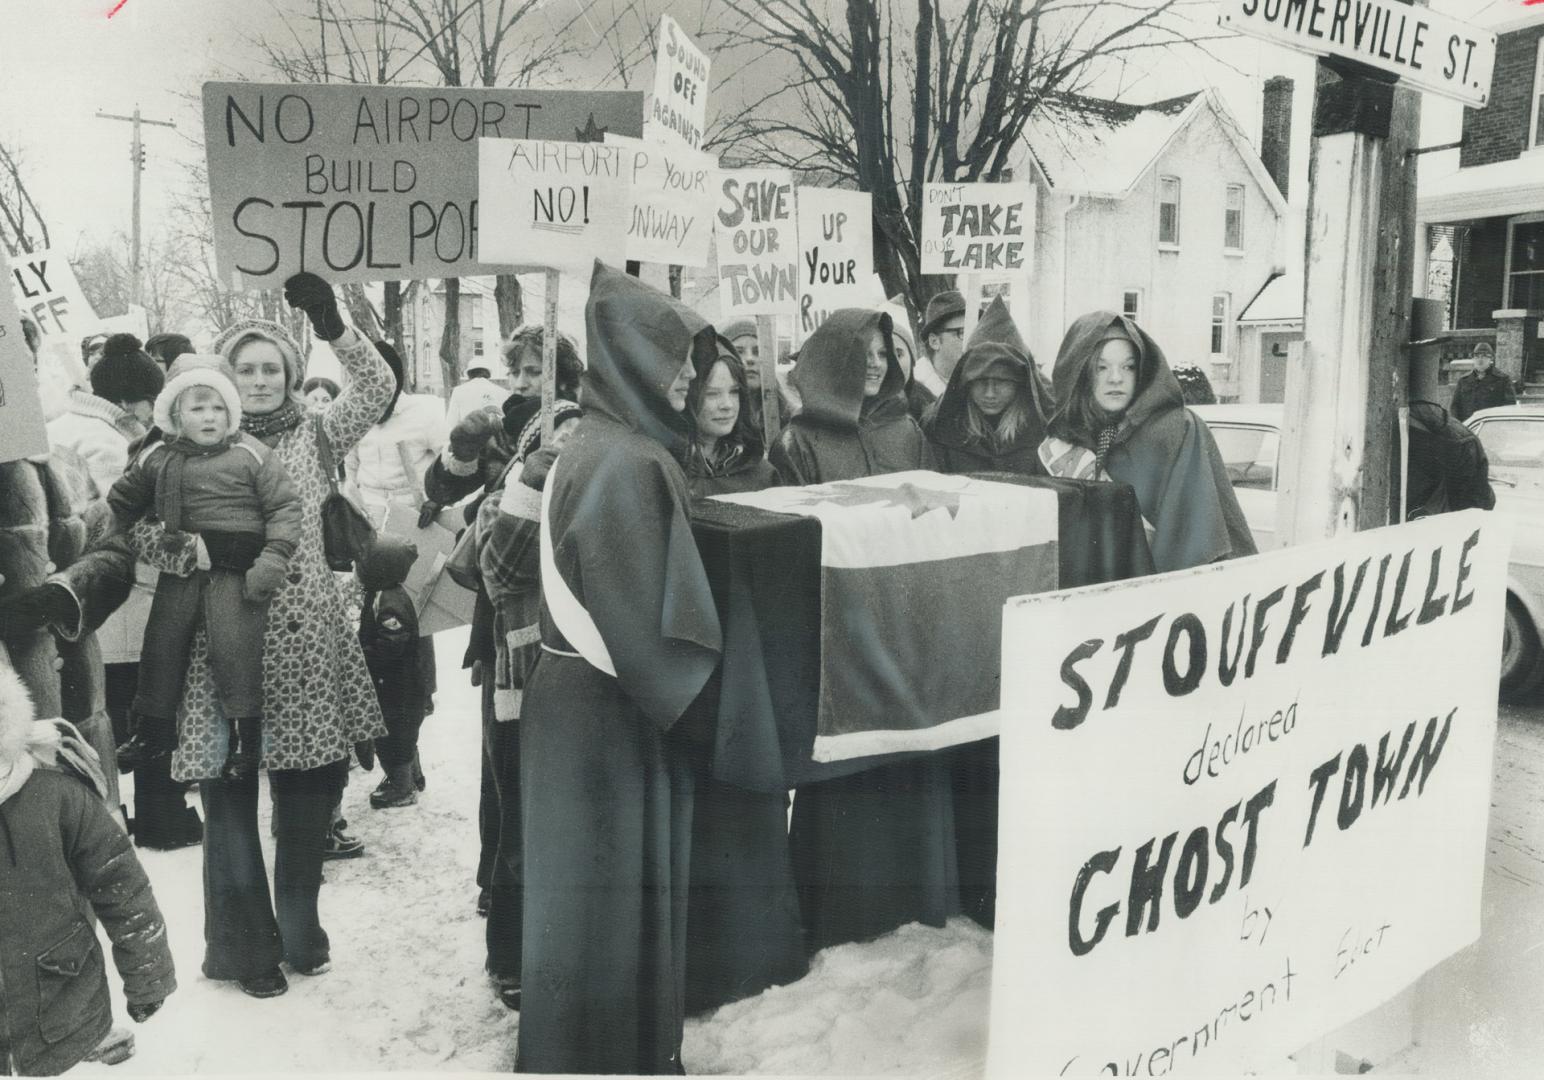 A coffin symbolizing the death of Stouffville was carried by boys and girls in monks' robes yesterday in a protest march on town hall to express fears(...)